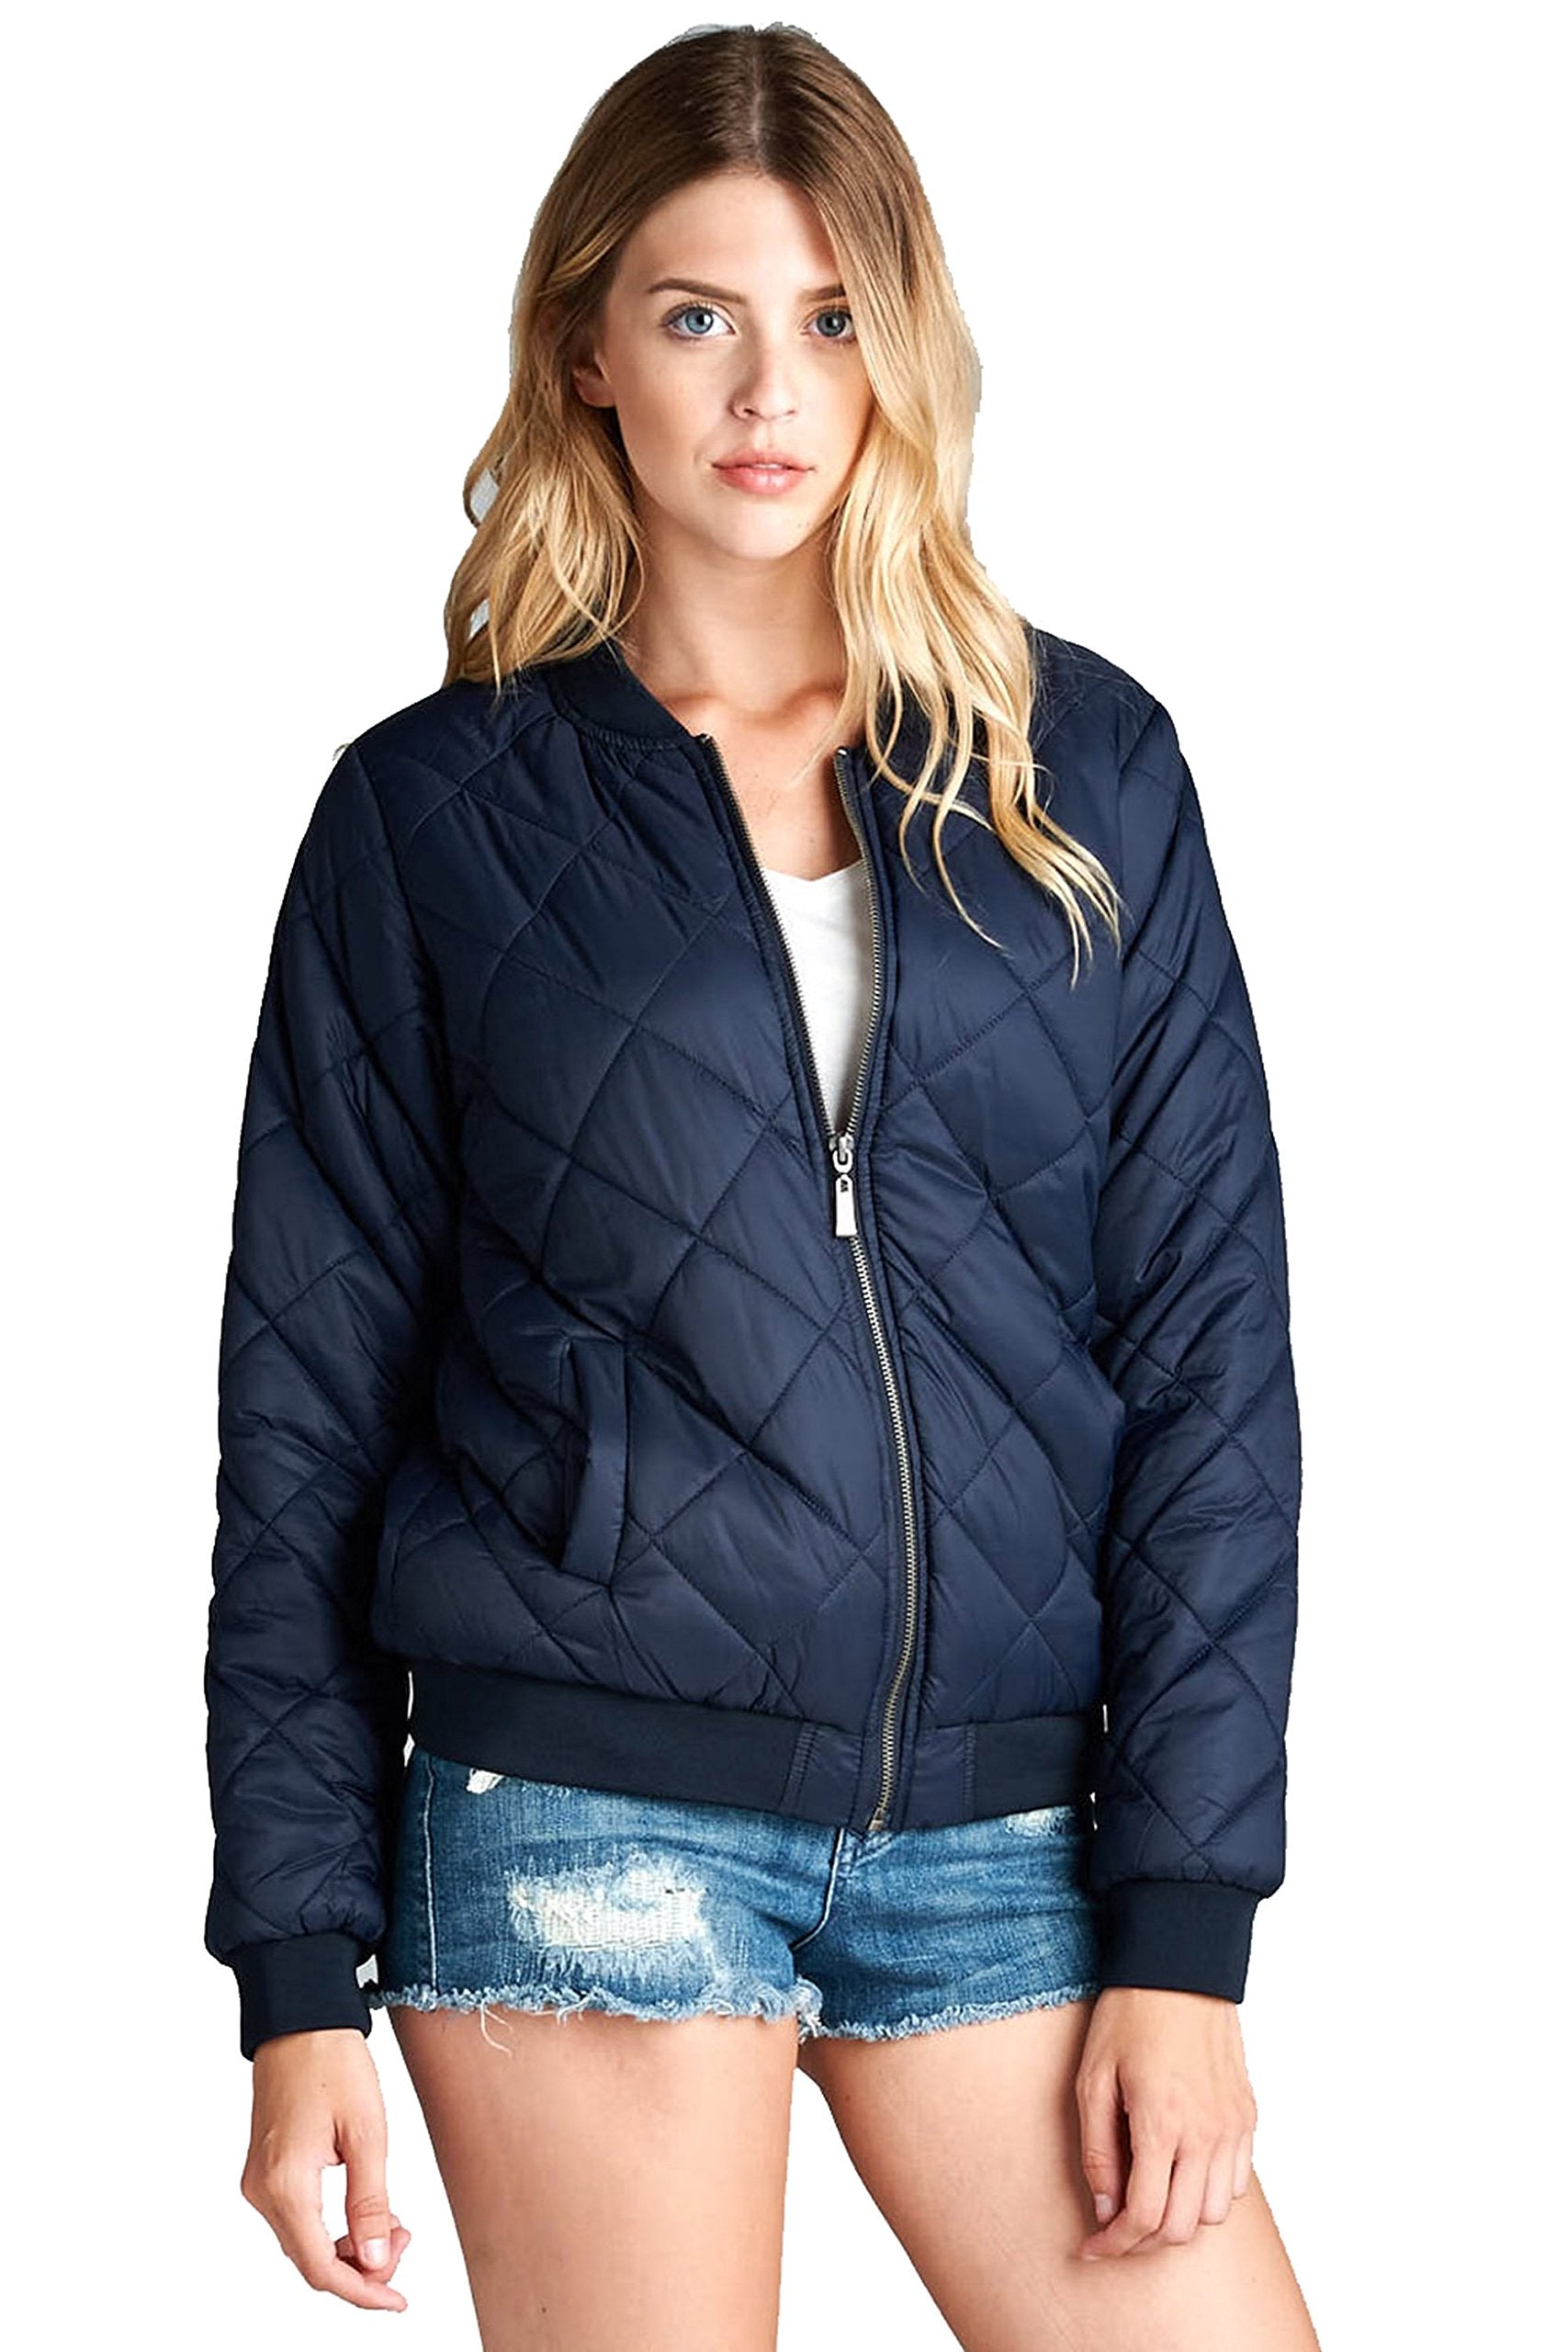 Khanomak Long Sleeve Zip Up Front Quilted Padded Stand Up Collar Ribbed Bomber Jacket